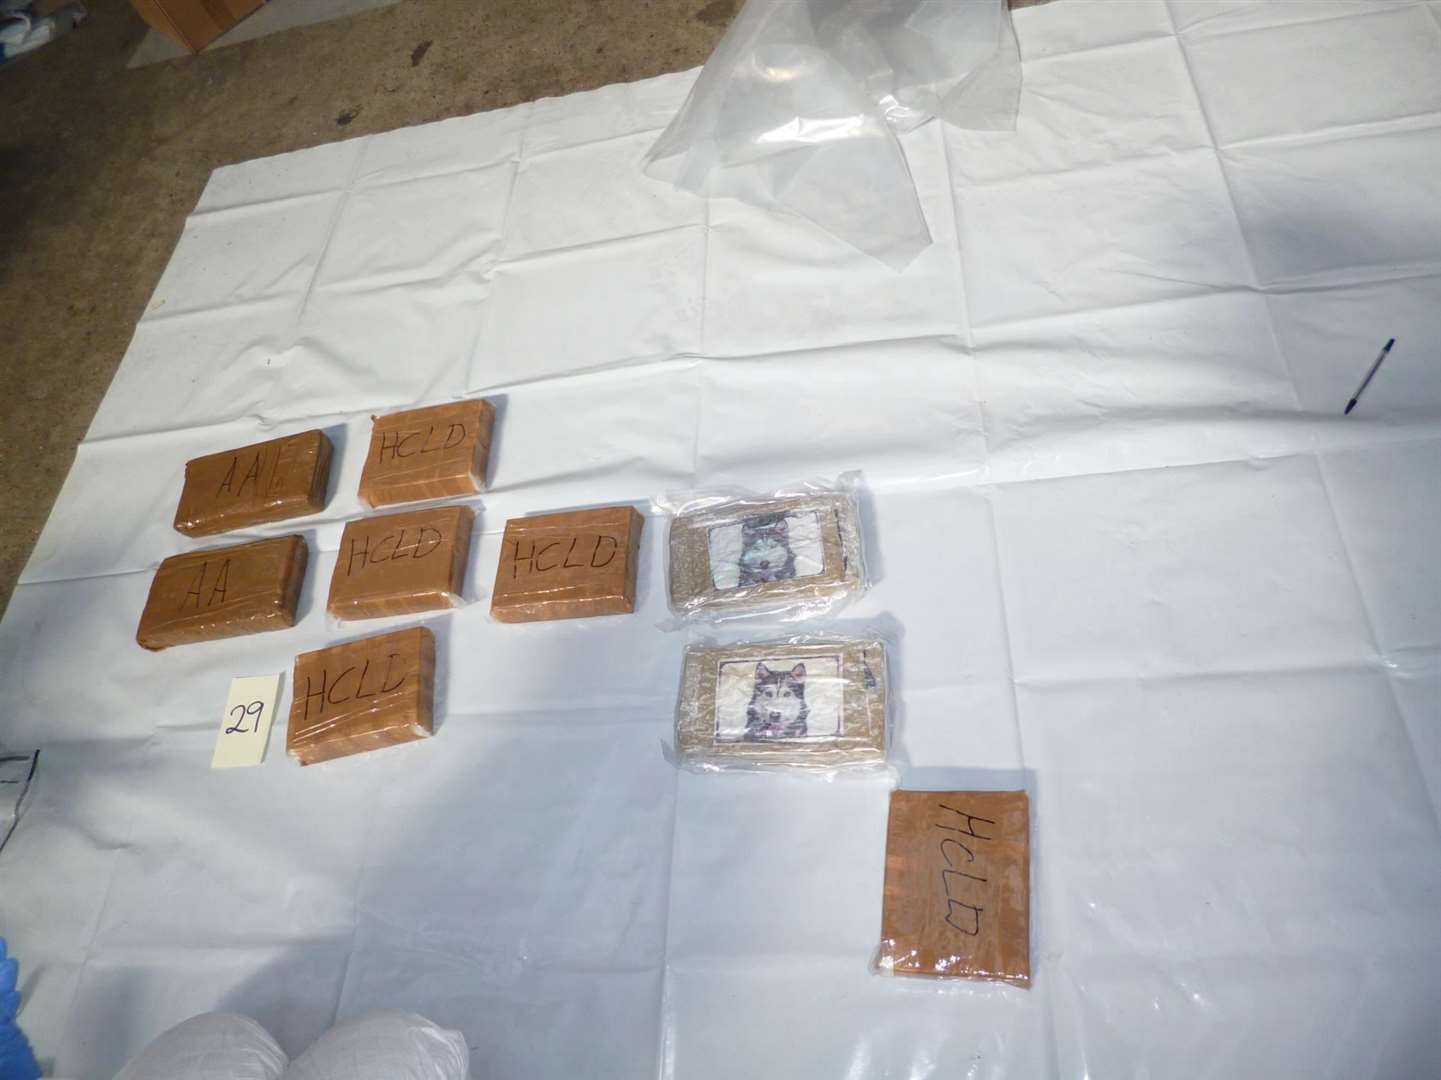 The heroin and cocaine was worth £16.5m. Photo: NCA